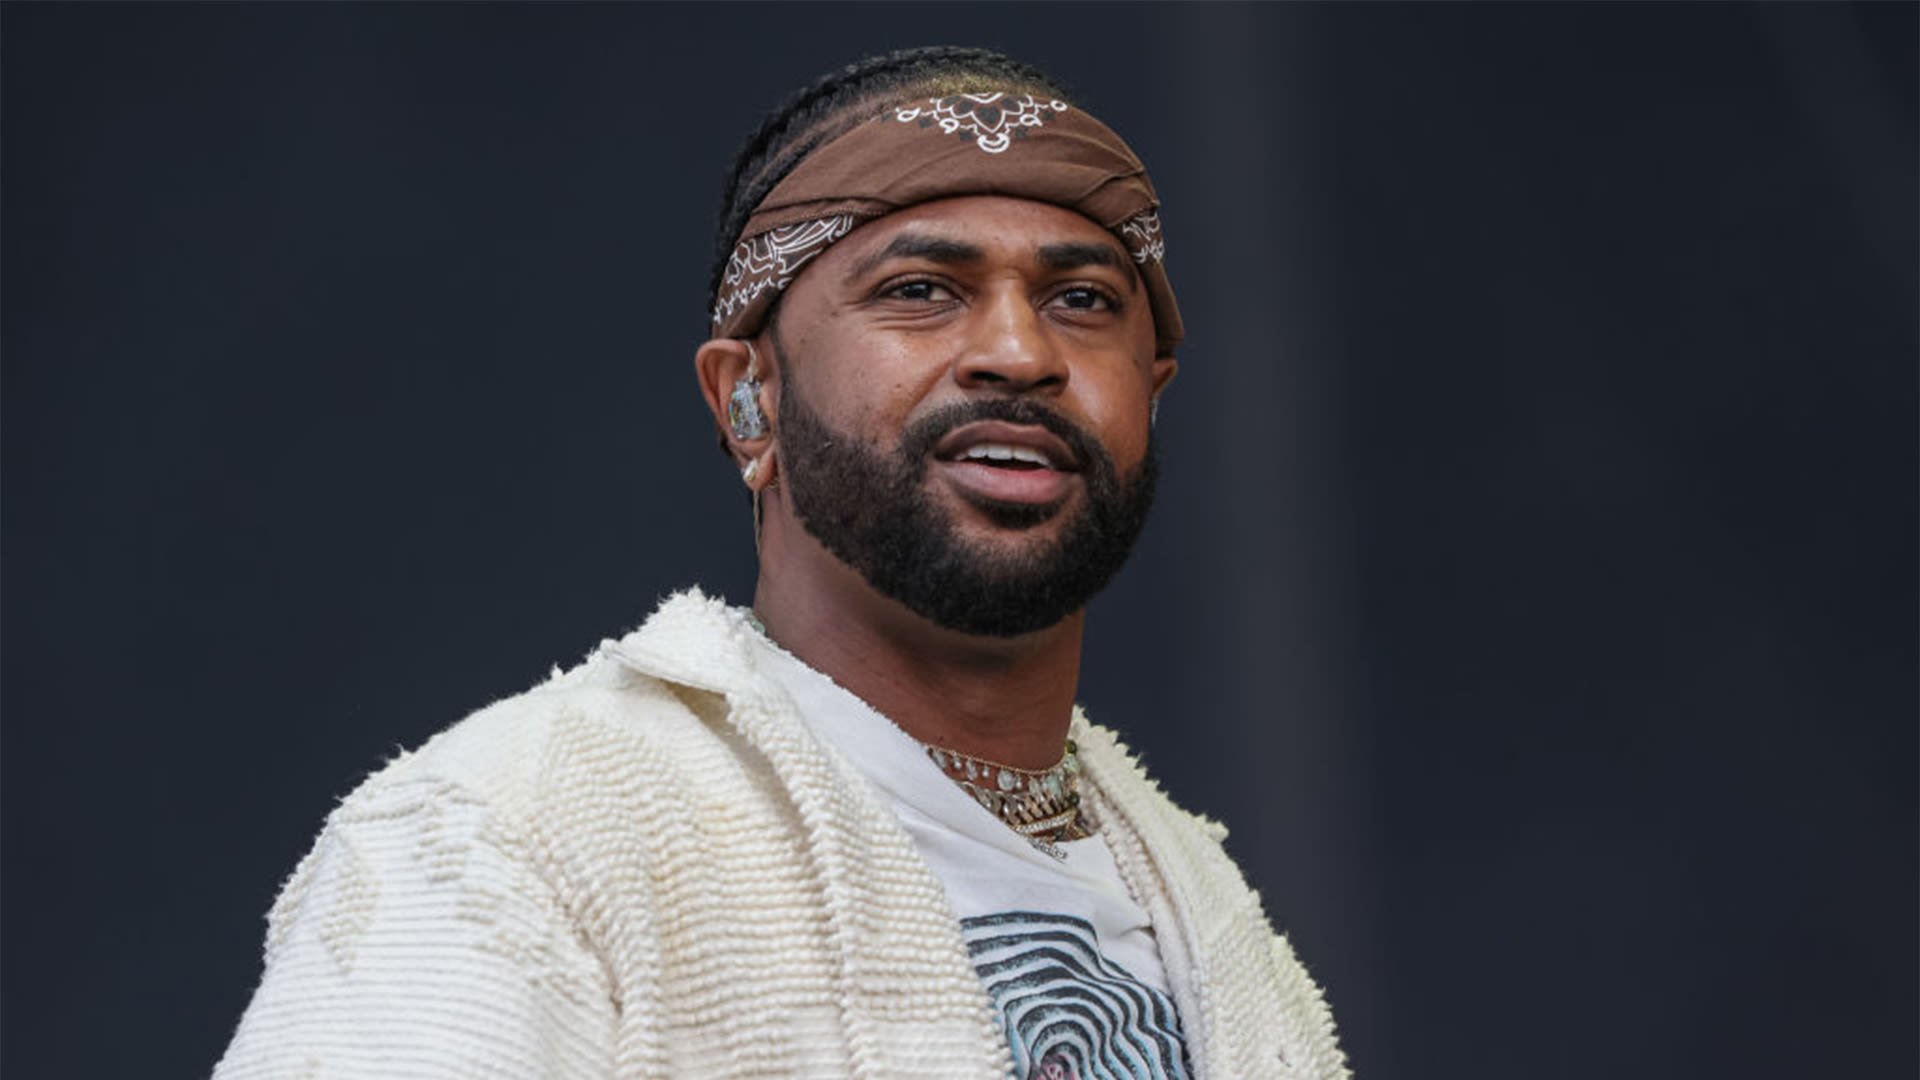 The Source |Big Sean Says Kendrick Lamar Actually Apologized Following Leaked Diss